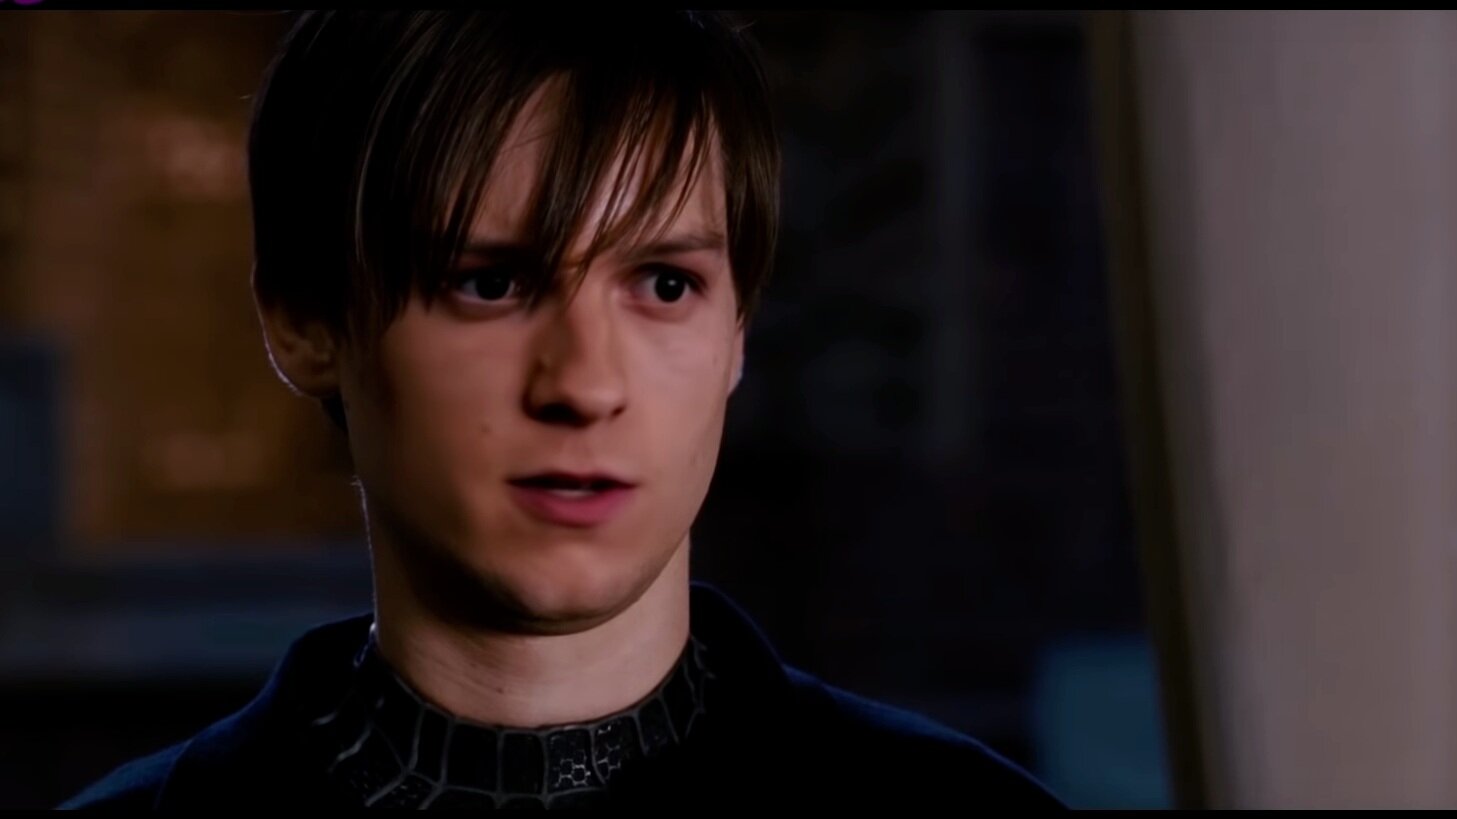 Tobey Maguire S Spider Man 3 Gets Even Creepier With A Deepfaked Tom Holland S Face Geektyrant